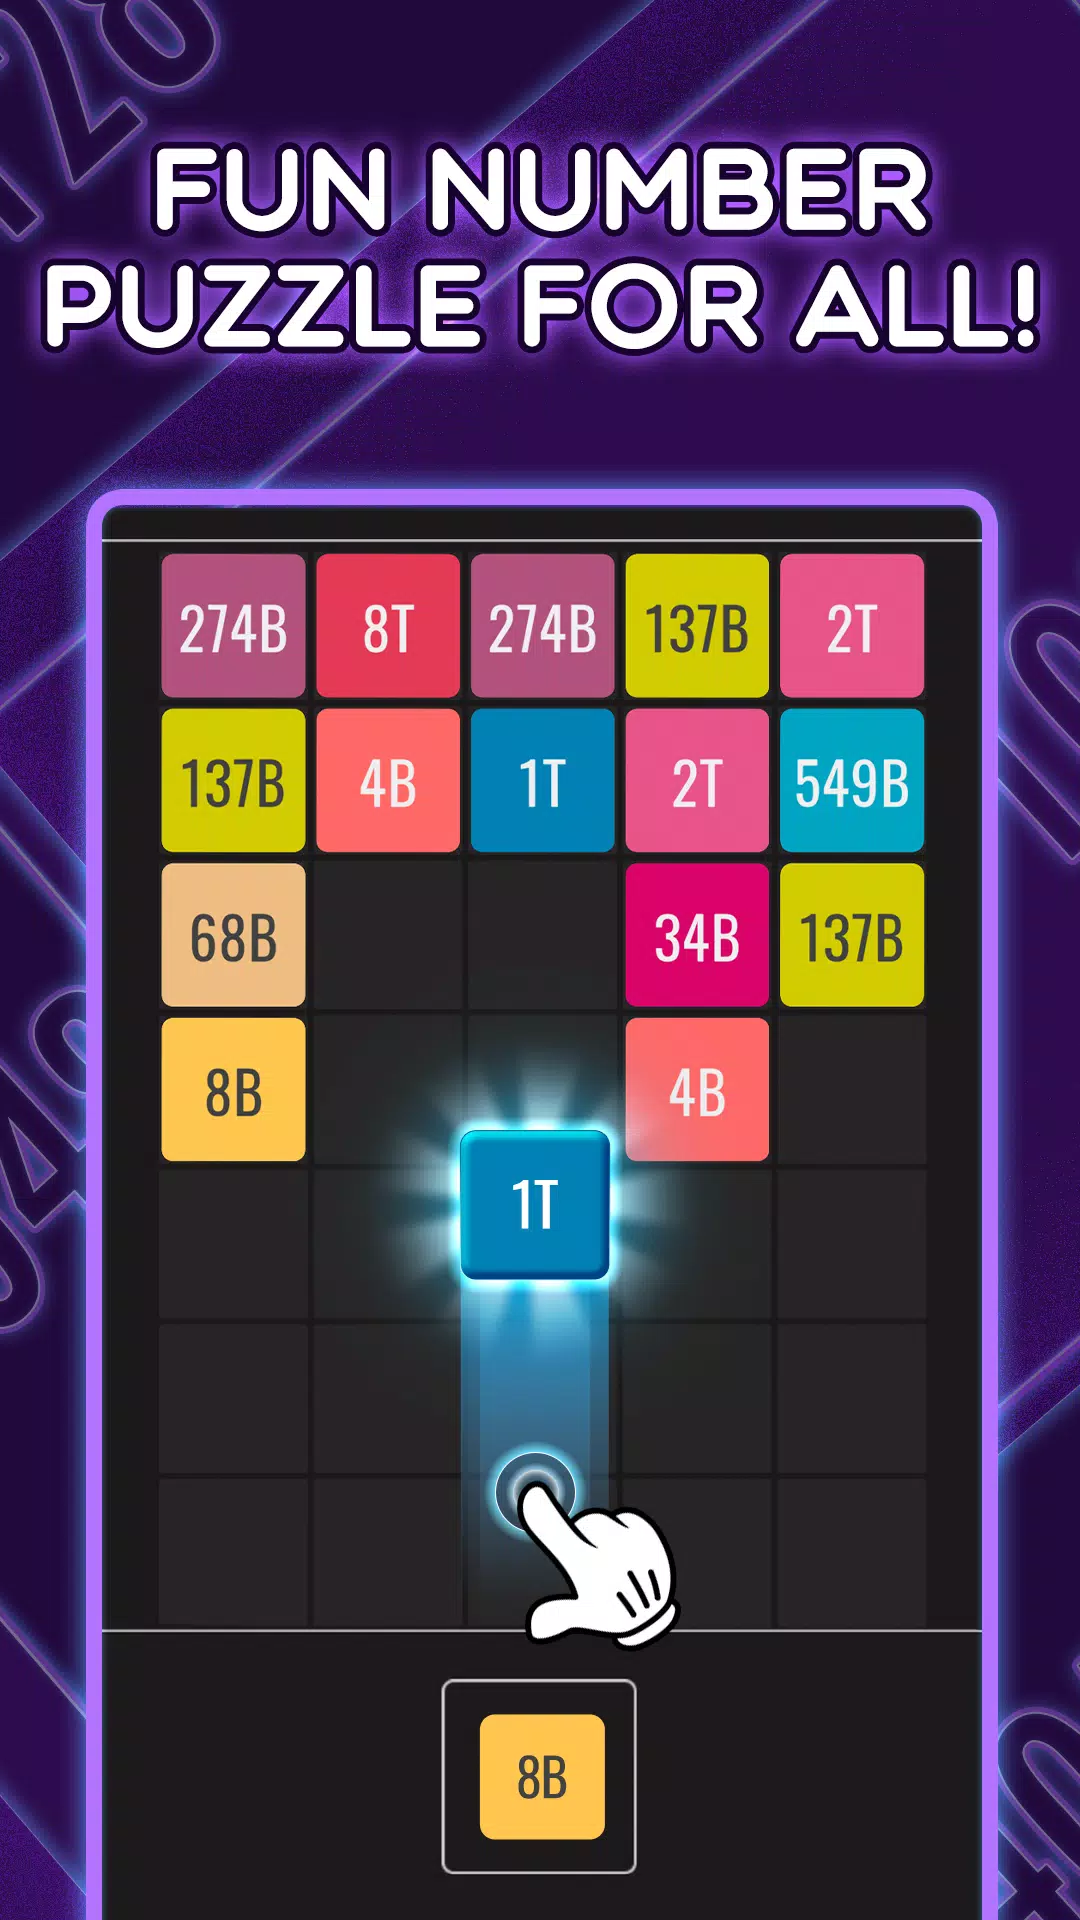 2048 Number puzzle game - Download & Play for Free Here